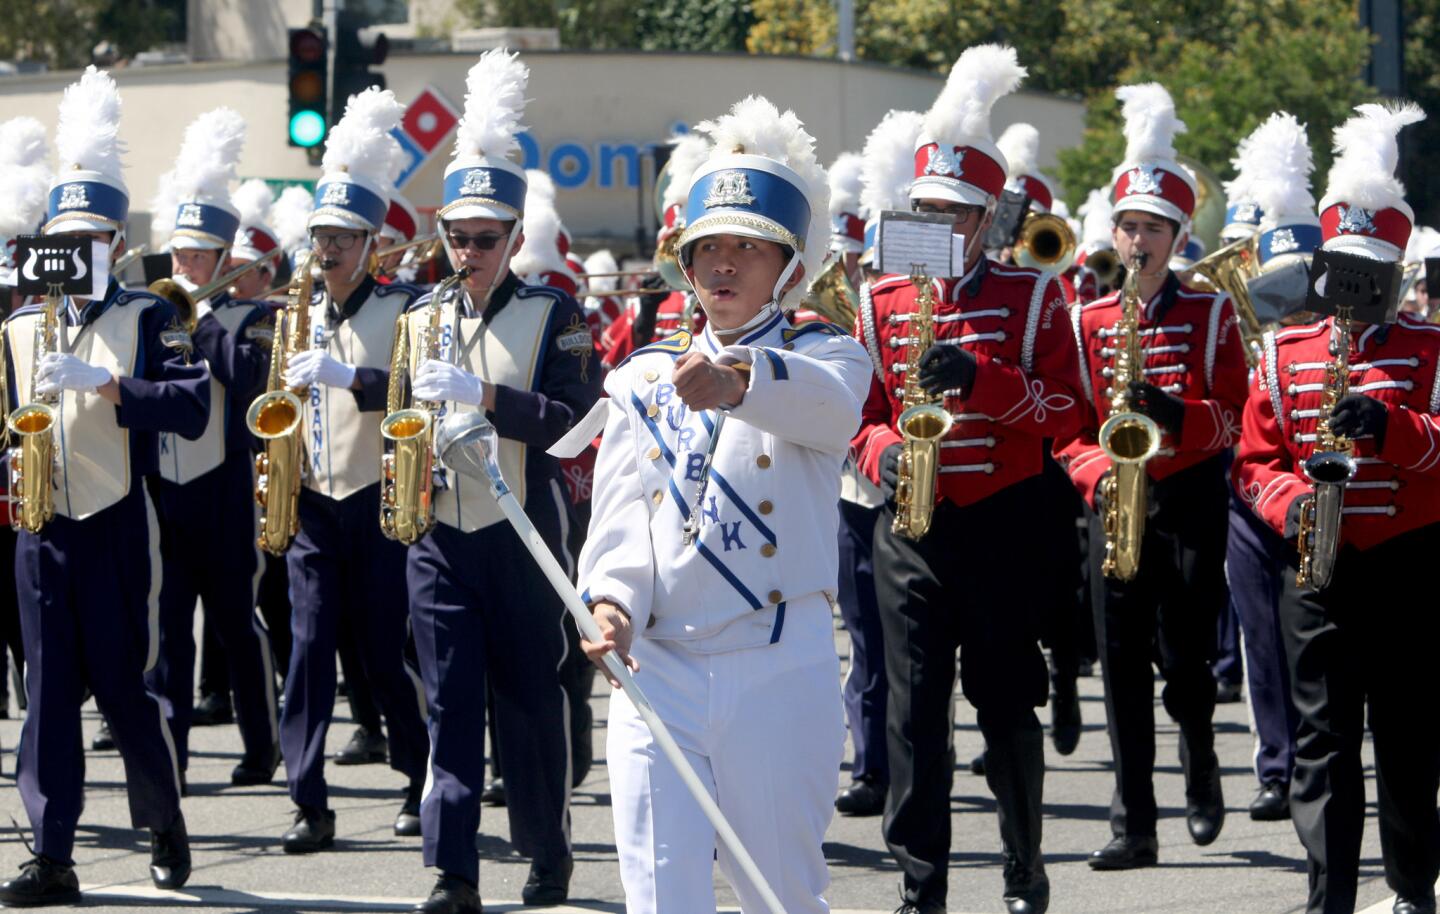 The Burbank Burroughs All City band performs at the annual Burbank on Parade, on Olive Avenue, in Burbank on Saturday, April 23, 2016.